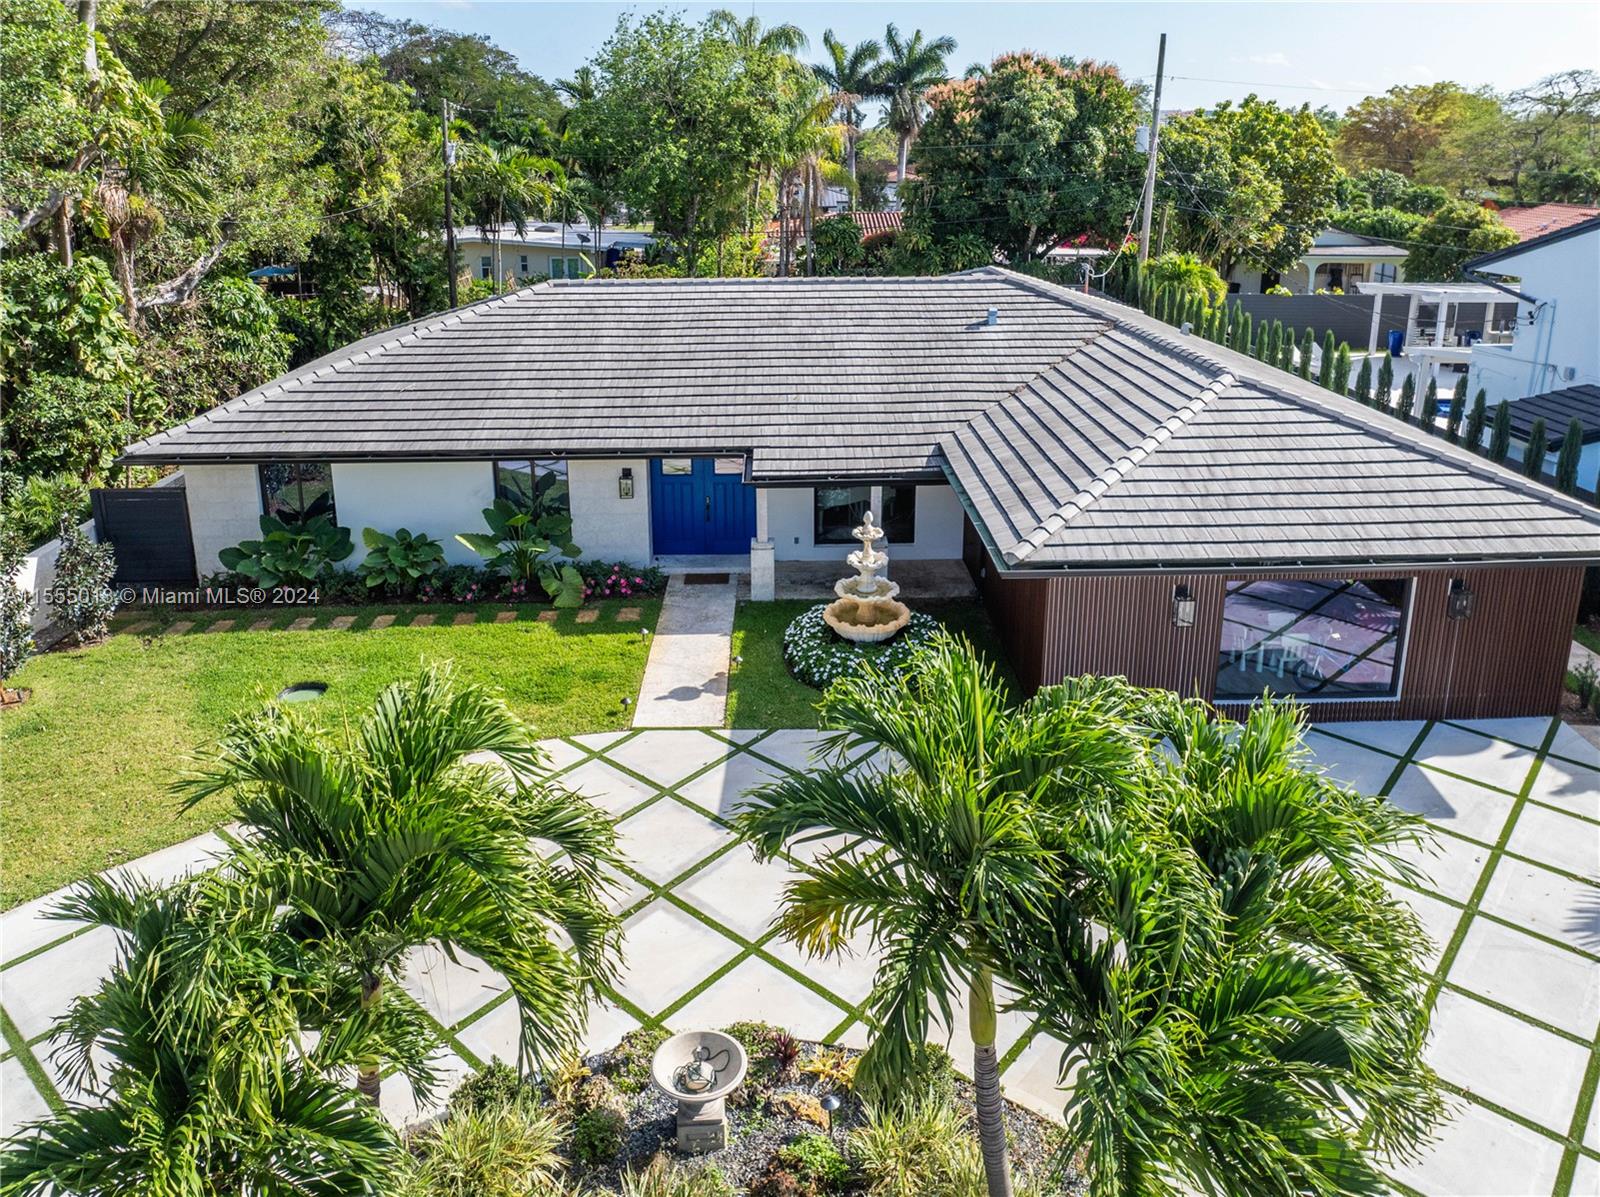 6000 SW 24th St, Miami, Florida 33142, 4 Bedrooms Bedrooms, ,5 BathroomsBathrooms,Residential,For Sale,6000 SW 24th St,A11555013